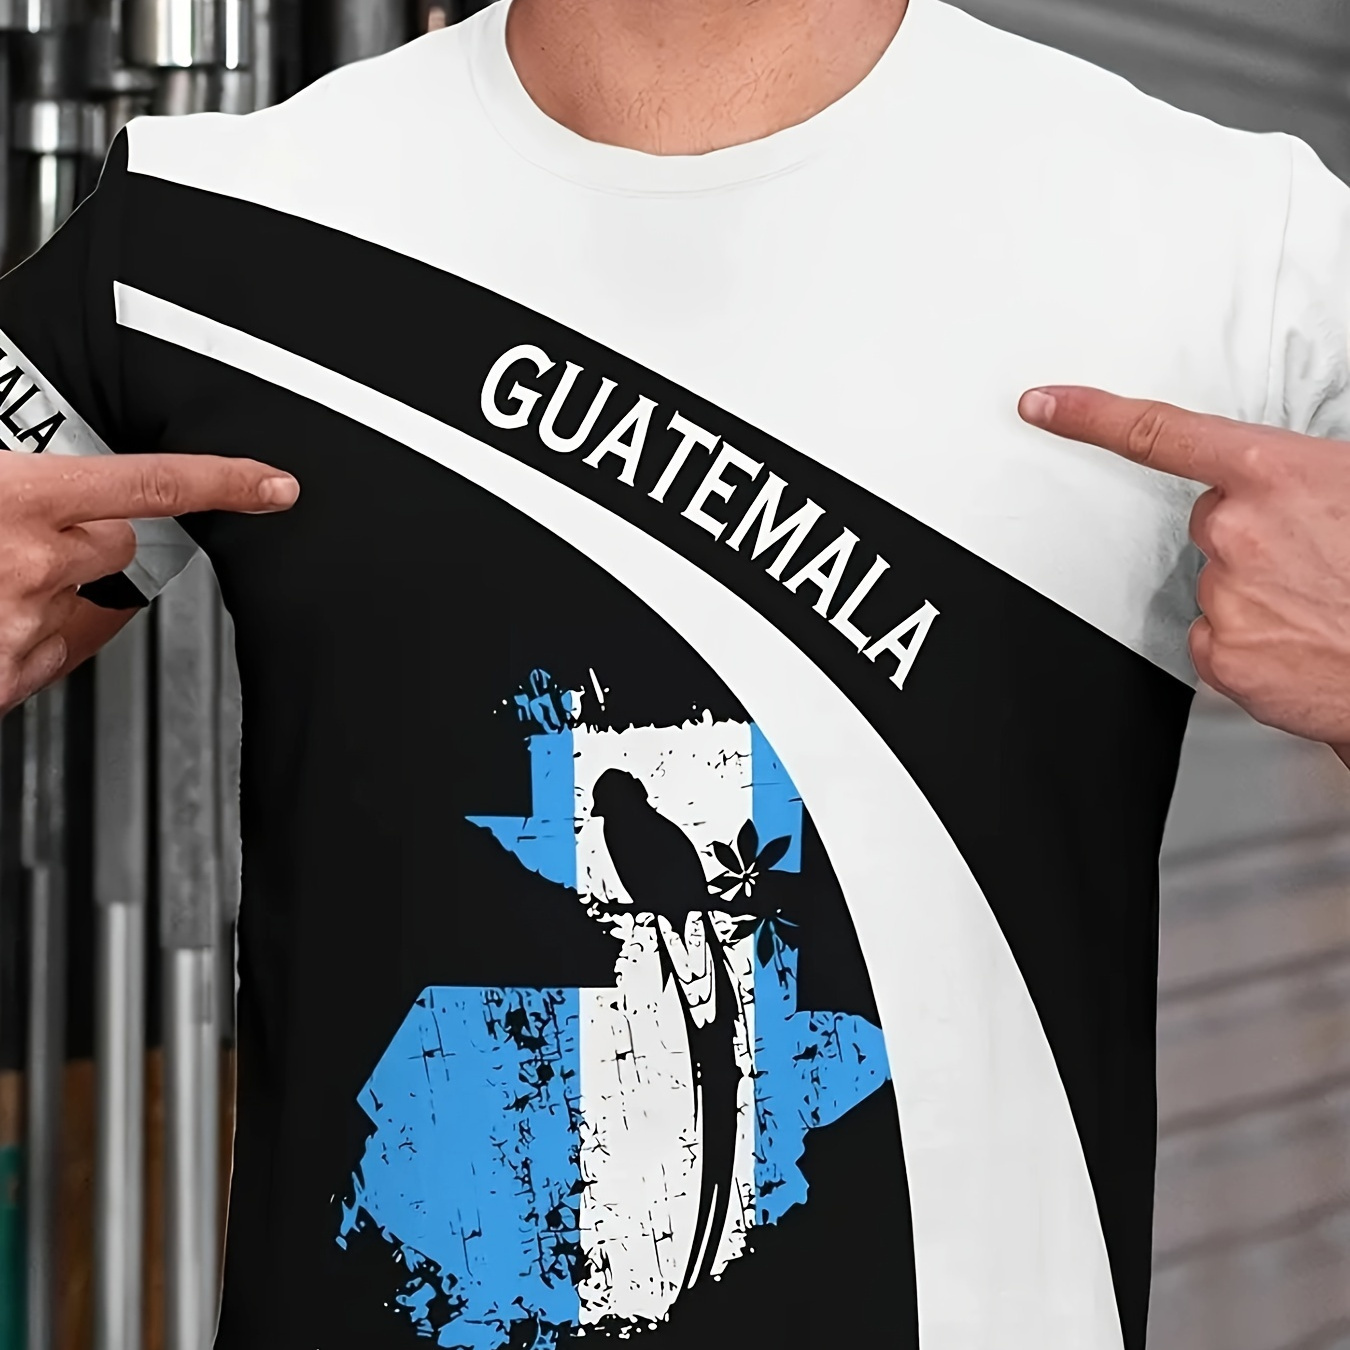 

Guatemalan Theme Flag And Bird Pattern And Letter Print "guatemala" Crew Neck And Short Sleeve T-shirt, Chic And Stylish Tops For Men's Summer Outdoors Wear